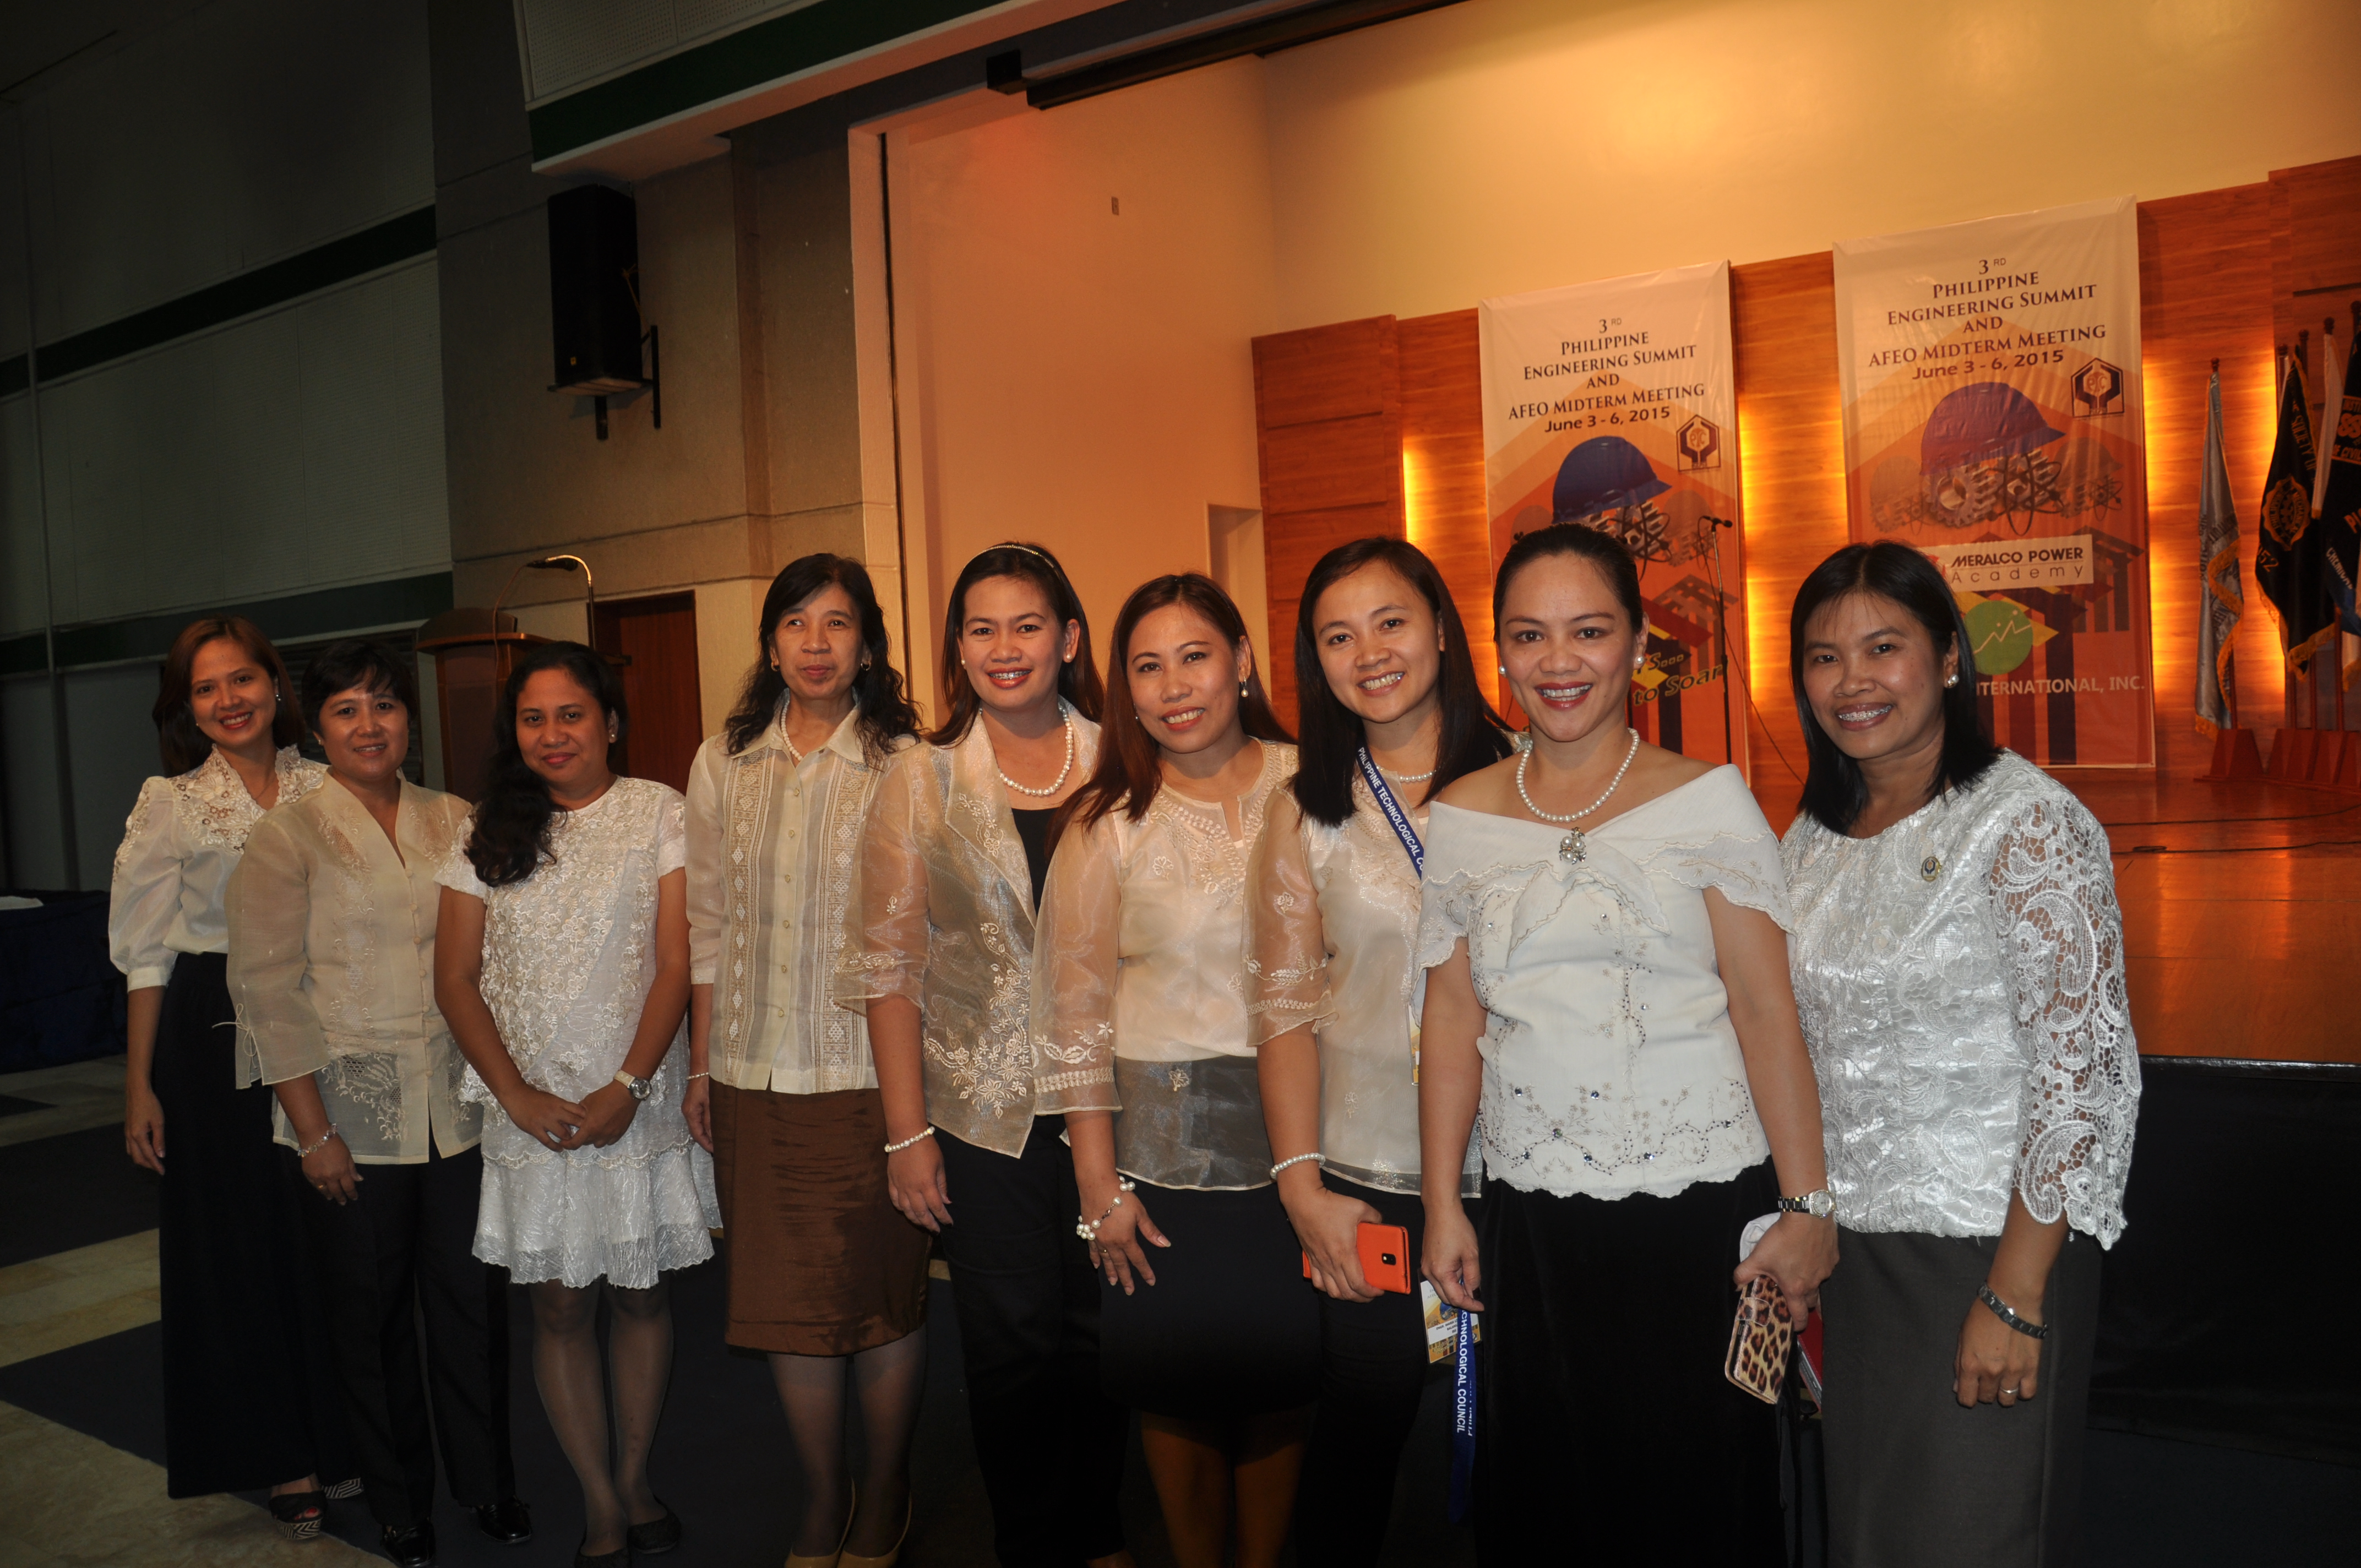 Dean and Professors from Batangas State University